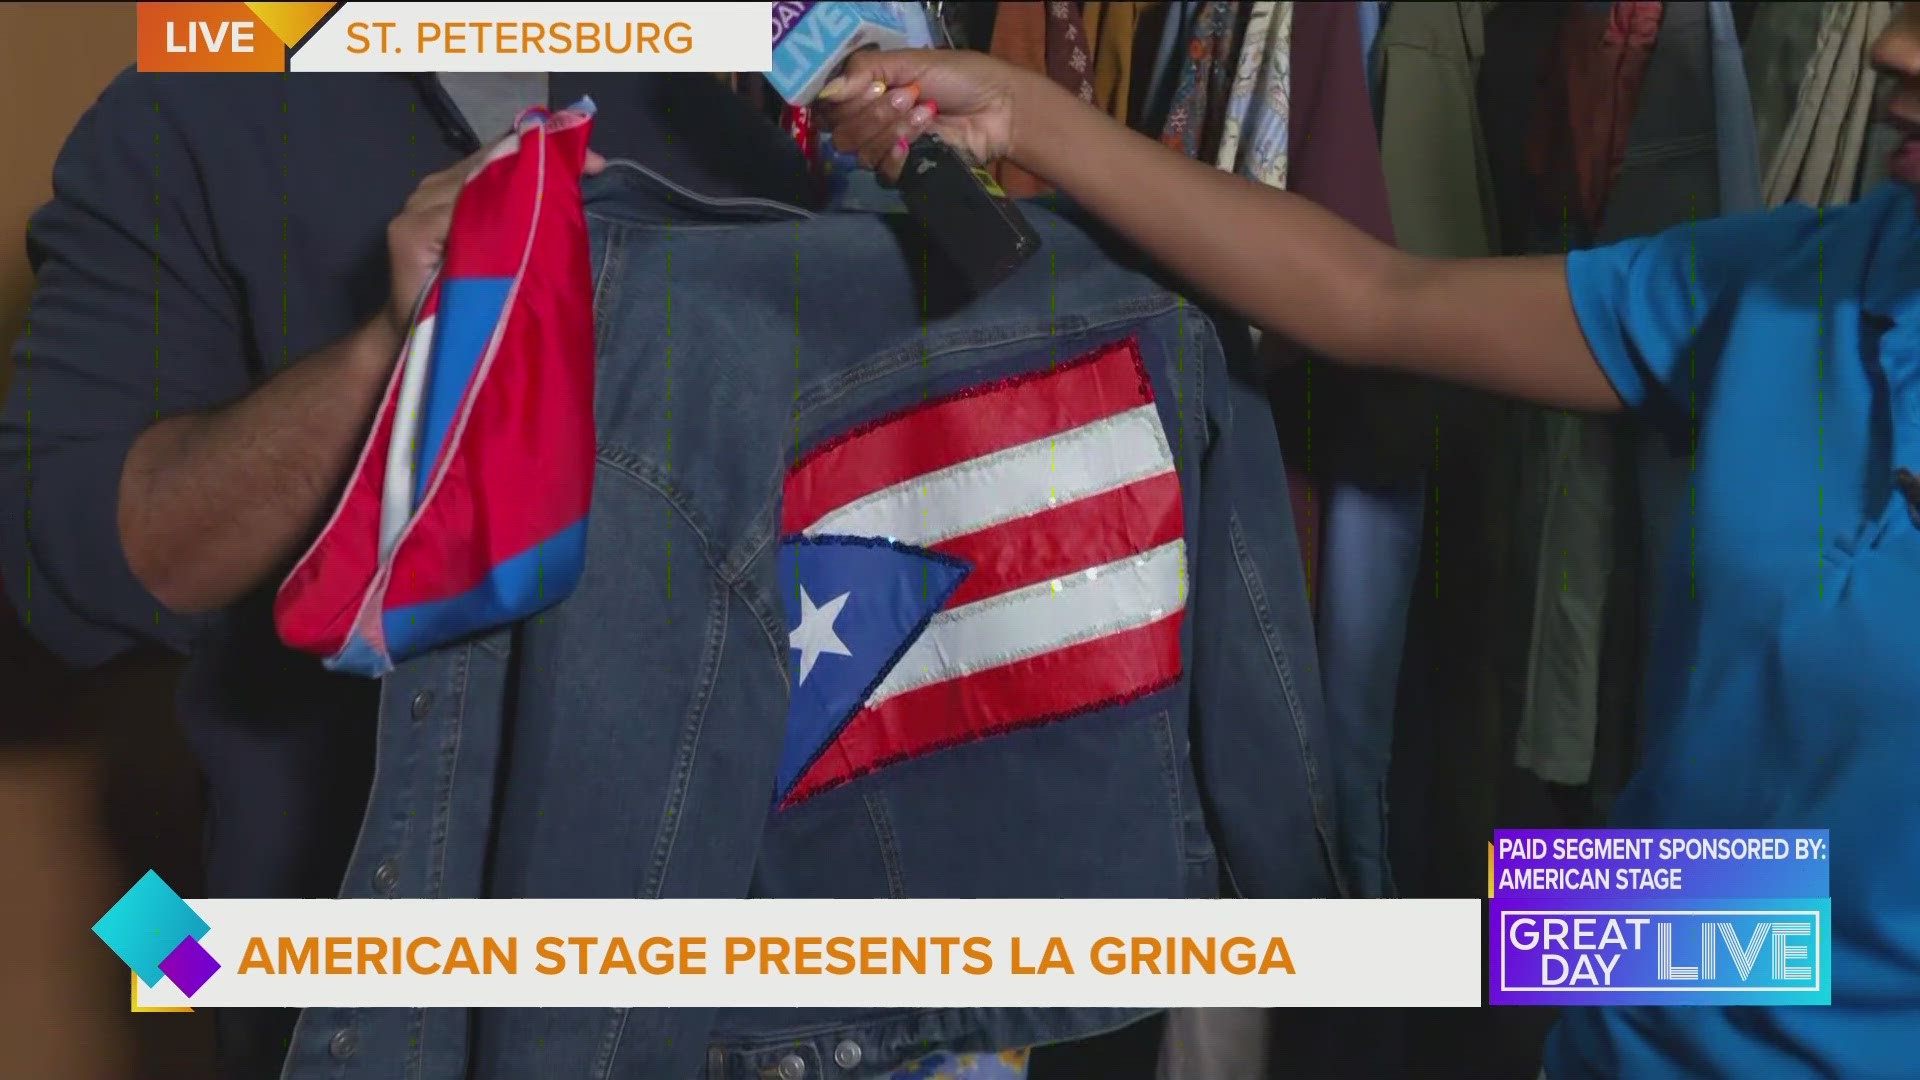 Java takes us inside the latest production at American Stage, “La Gringa!” Get your tickets today by visiting AmericanStage.org.